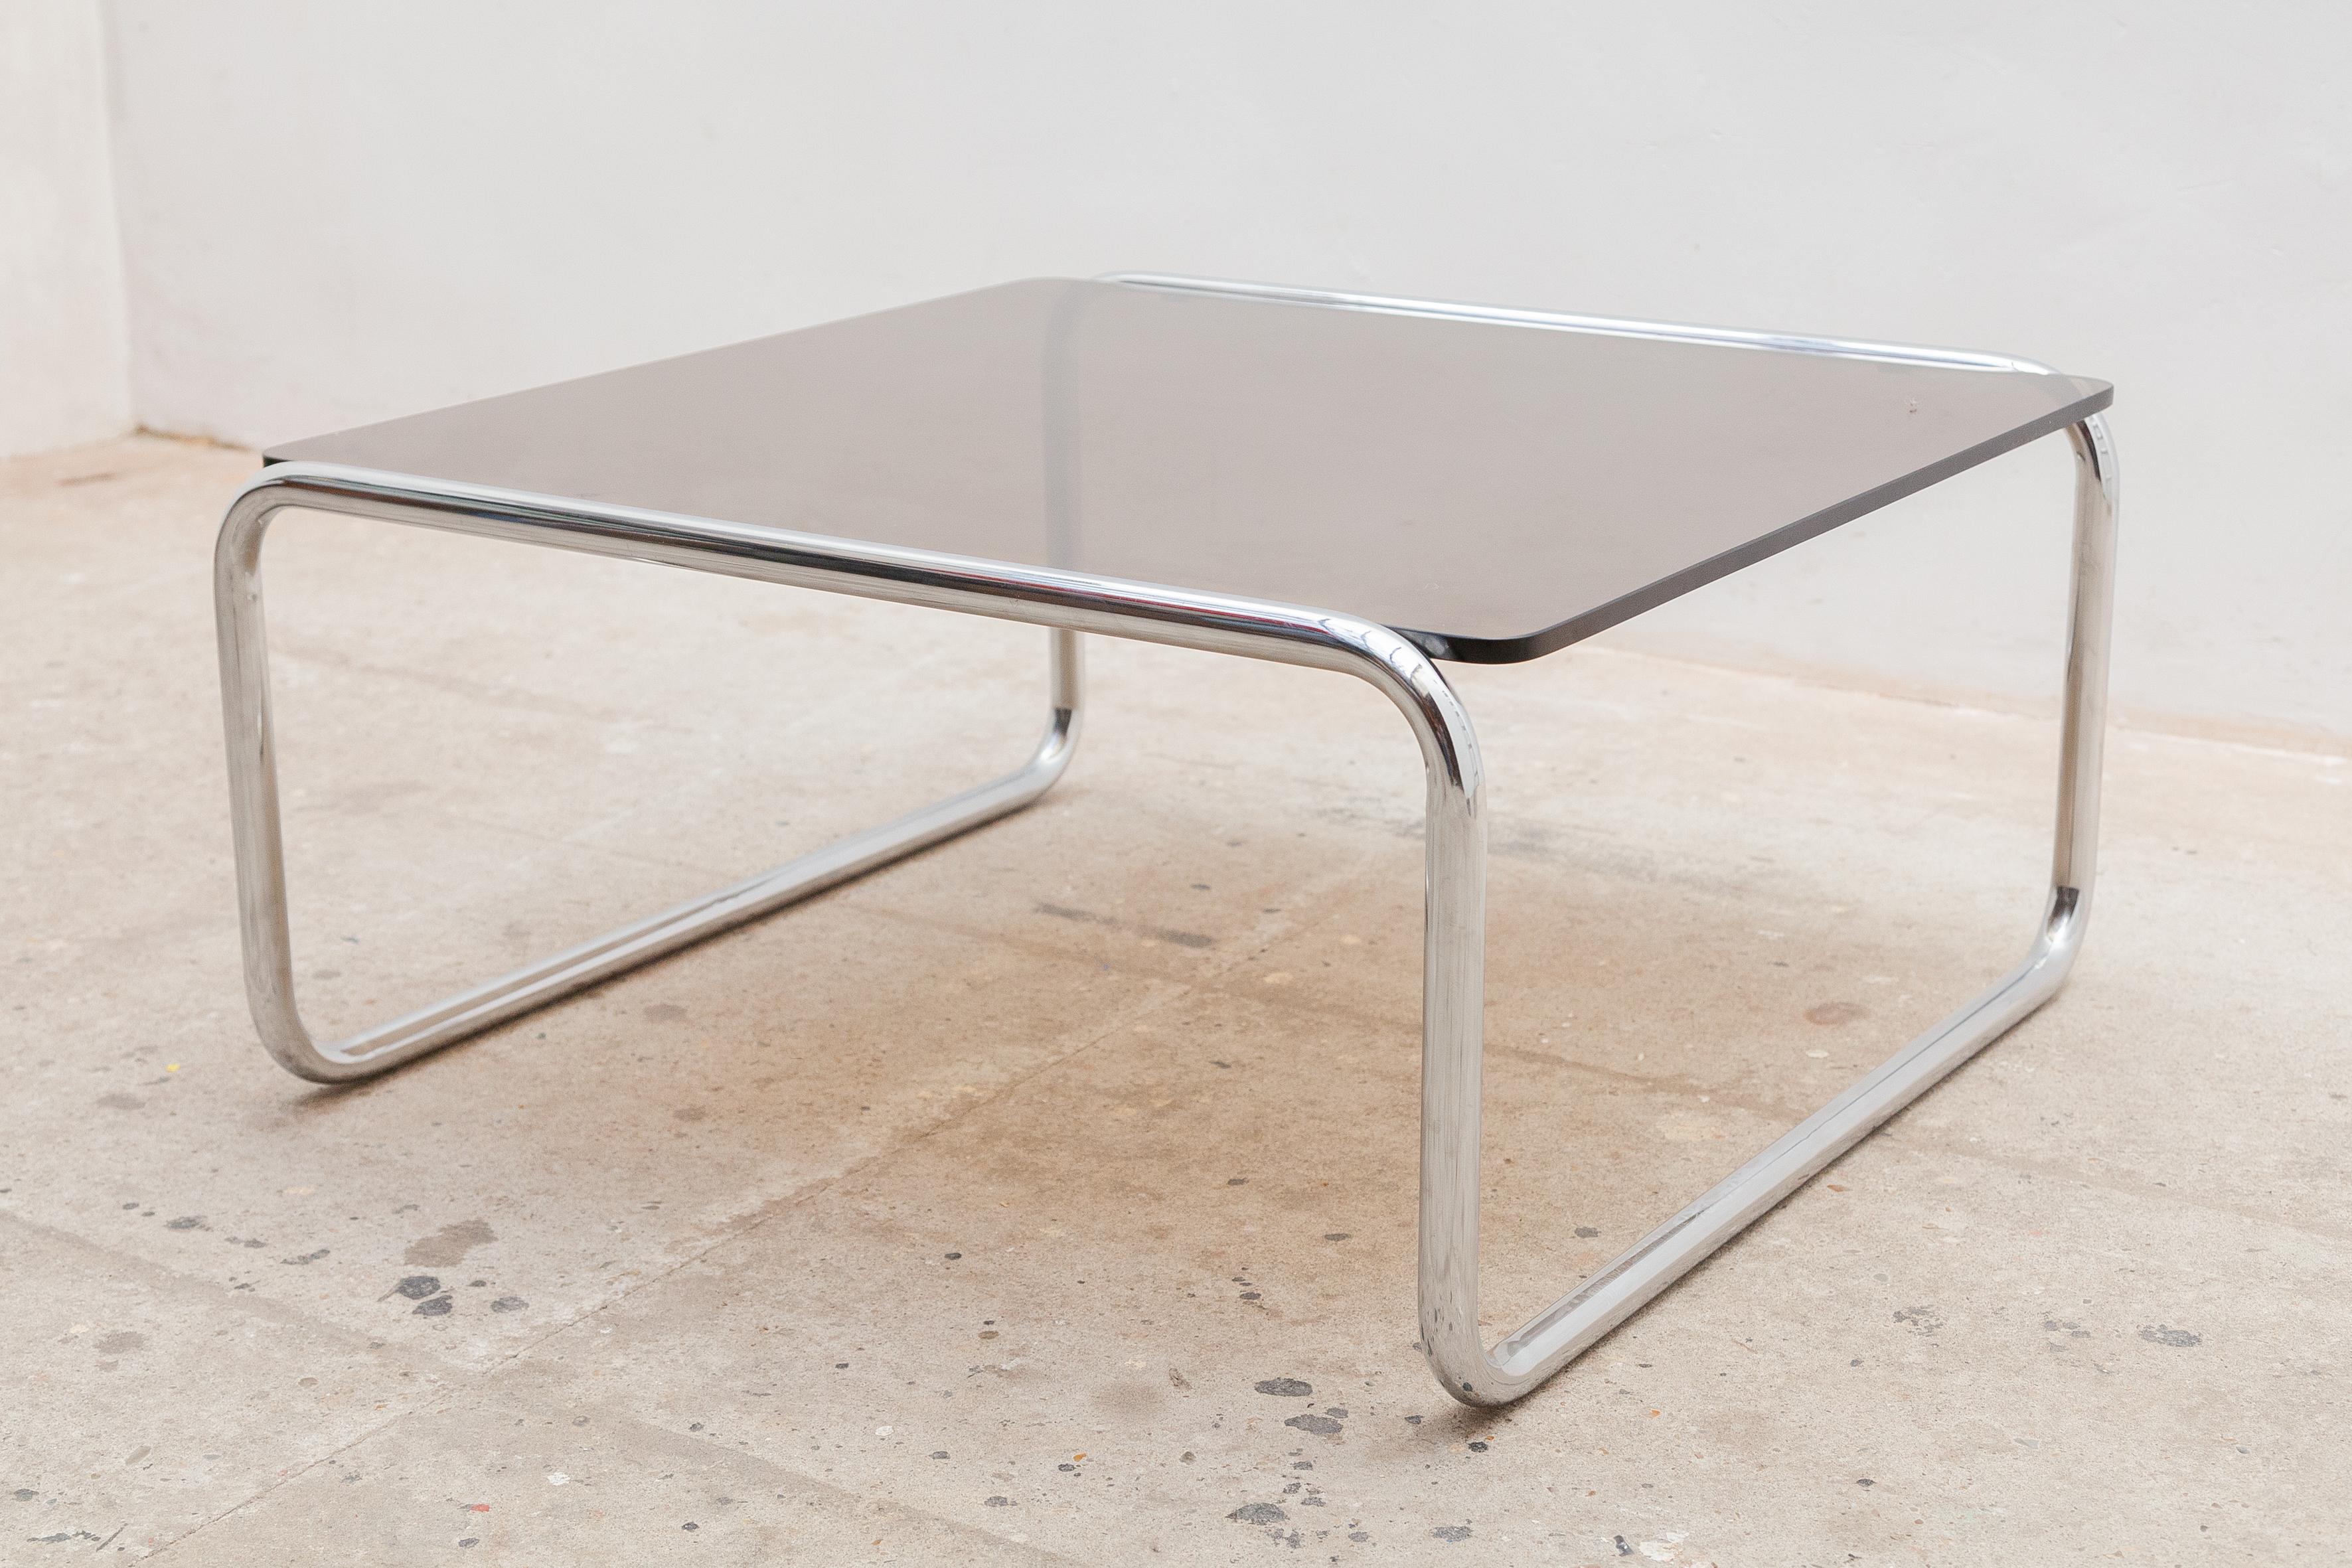 Bauhaus style seventies design coffee table features in chromed tubular frame with a smoked glass top, this coffee table is in a very nice quality, very suitable as a side table by sofa or as a solid plant table, console. Also available a large